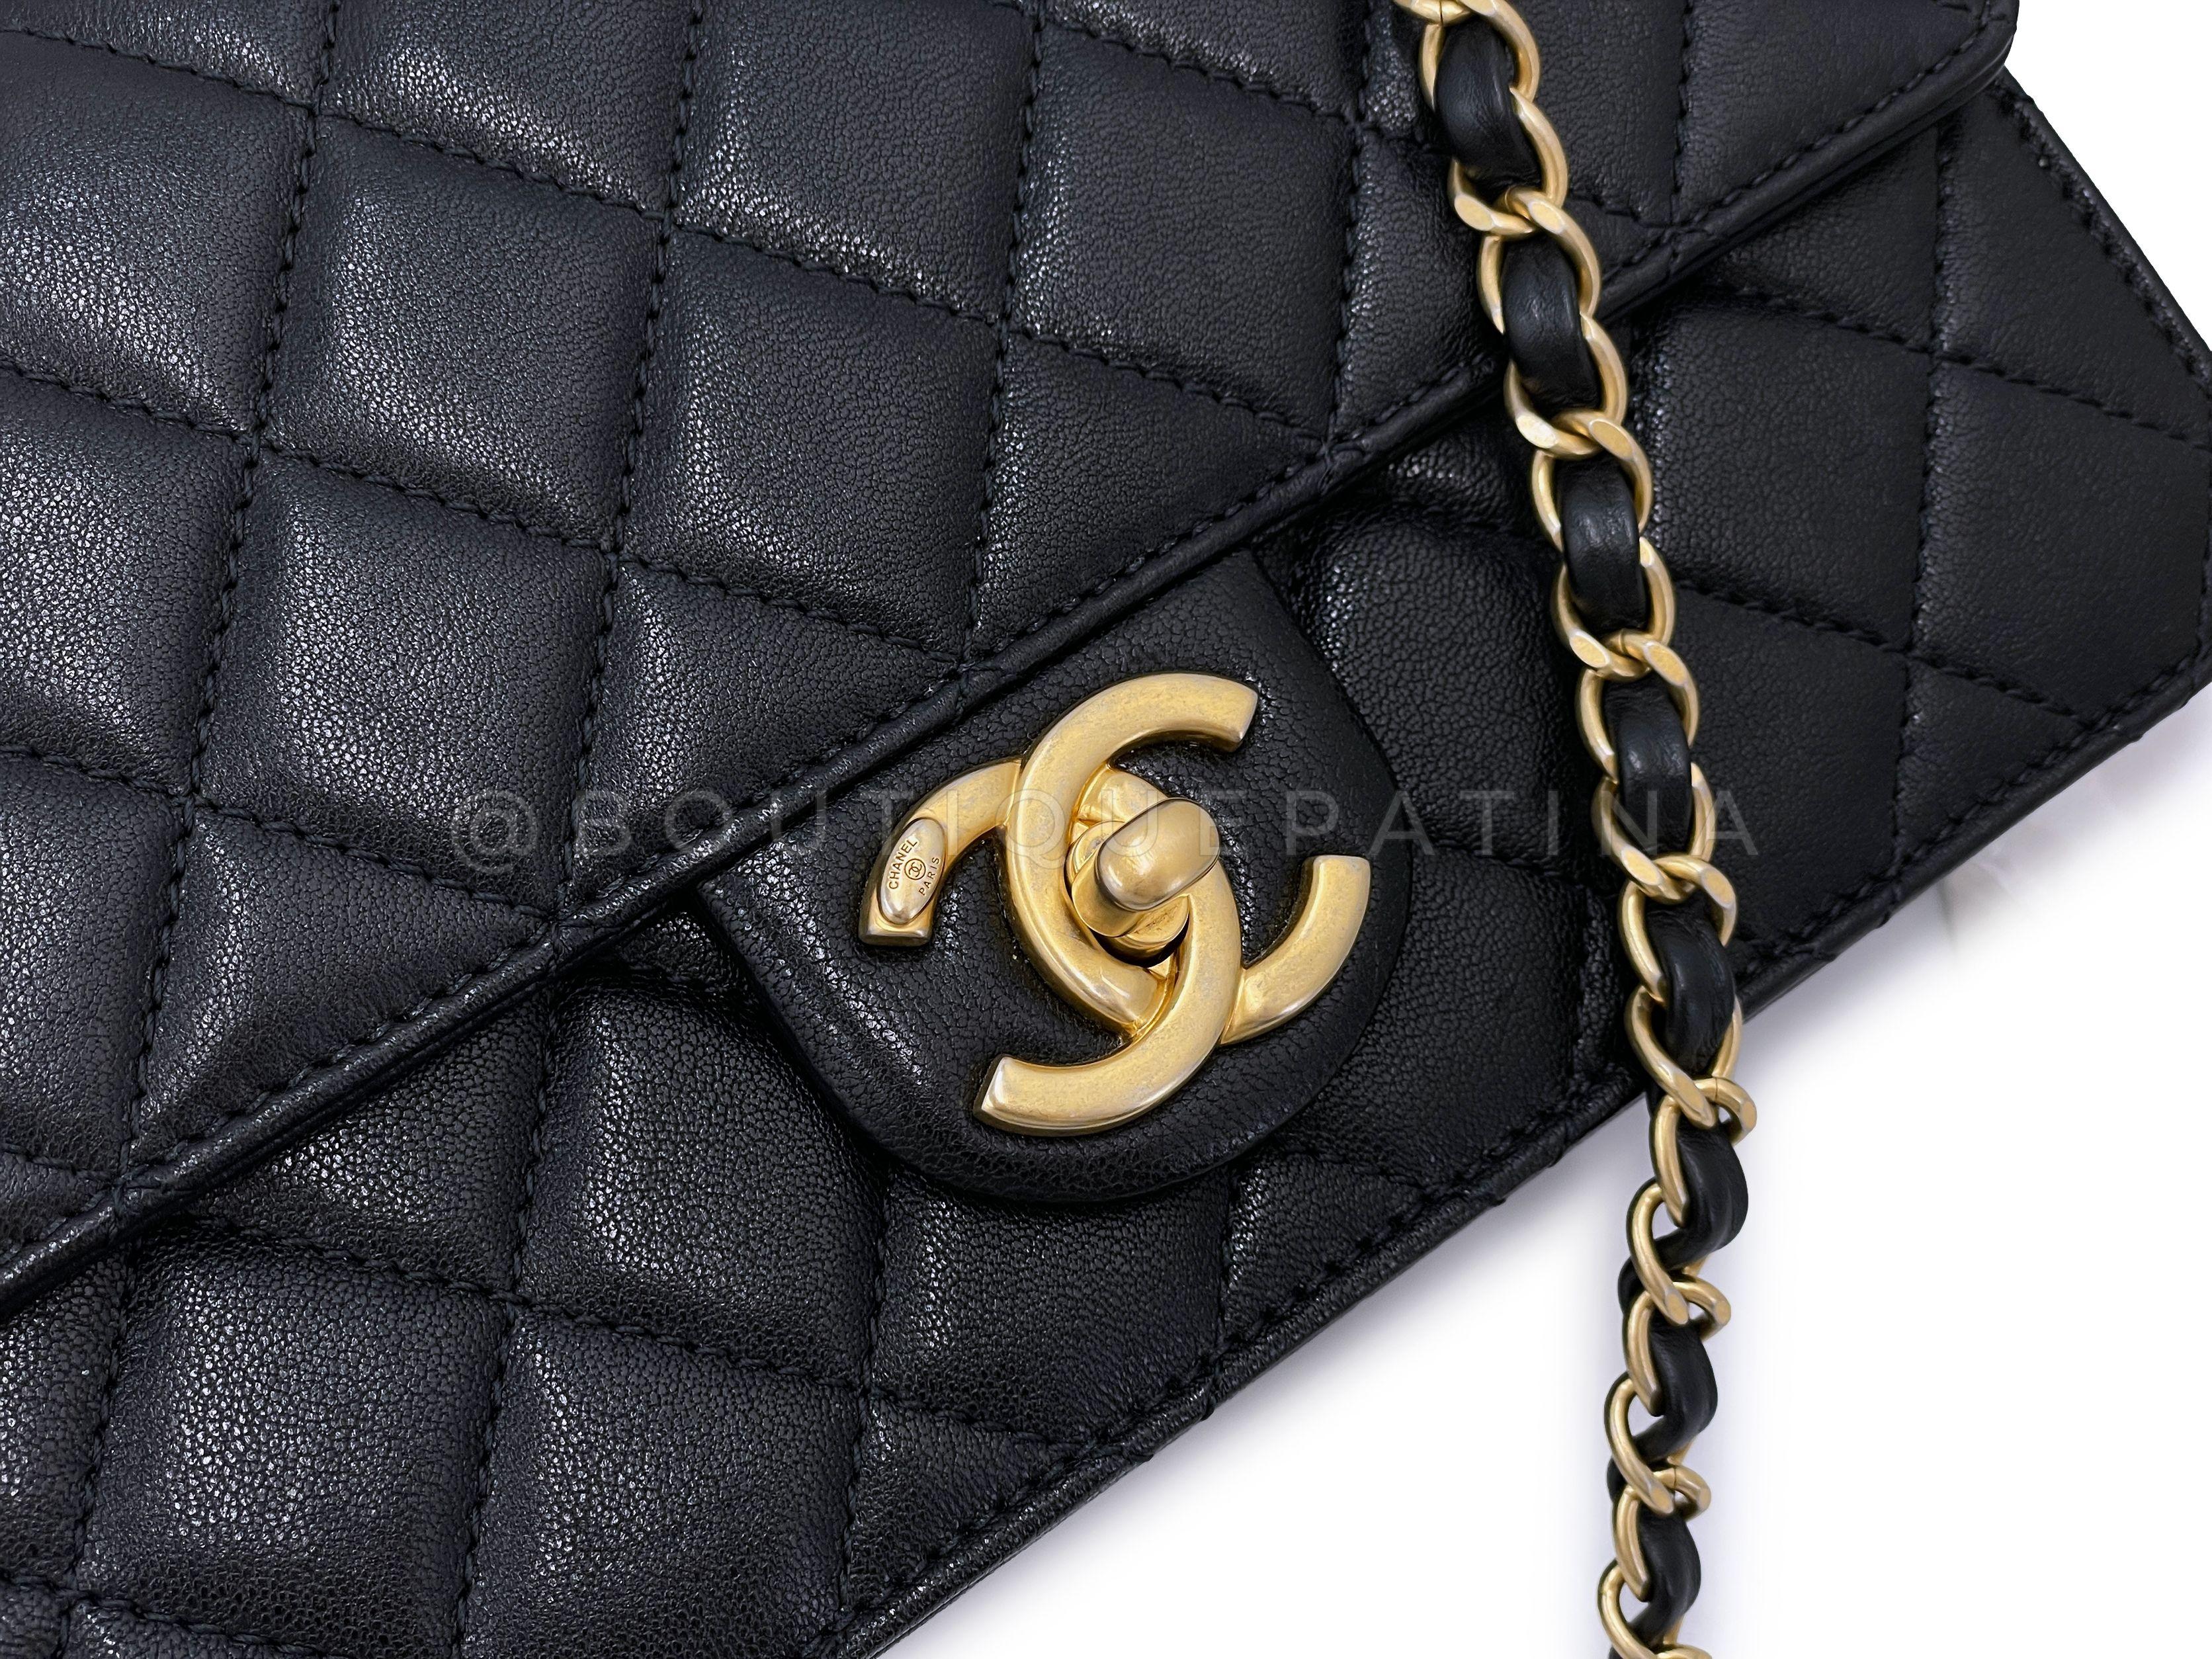 Pristine 19S Chanel Chic Pearls Quilted Flap Bag Black GHW 66675 For Sale 3